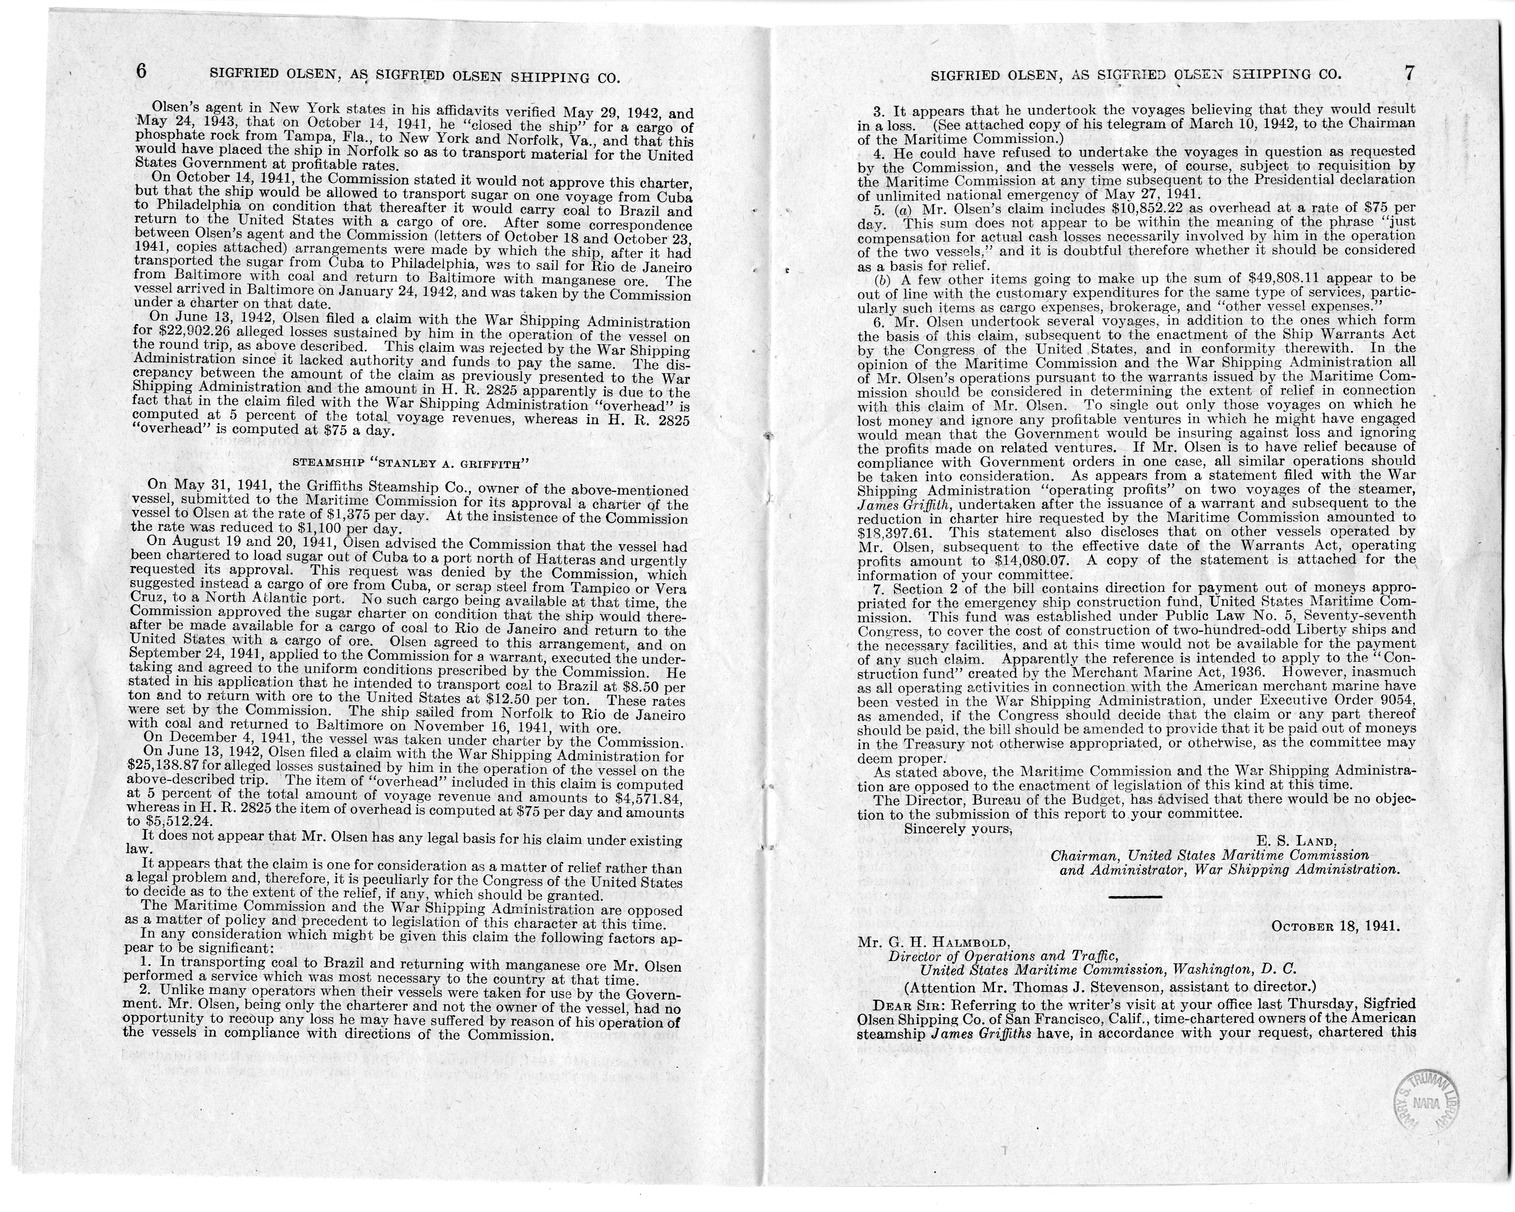 Memorandum from Harold D. Smith to M. C. Latta, H.R. 1566, For the Relief of Sigfried Olsen, Doing Business as Sigfried Olsen Shipping Company, with Attachments